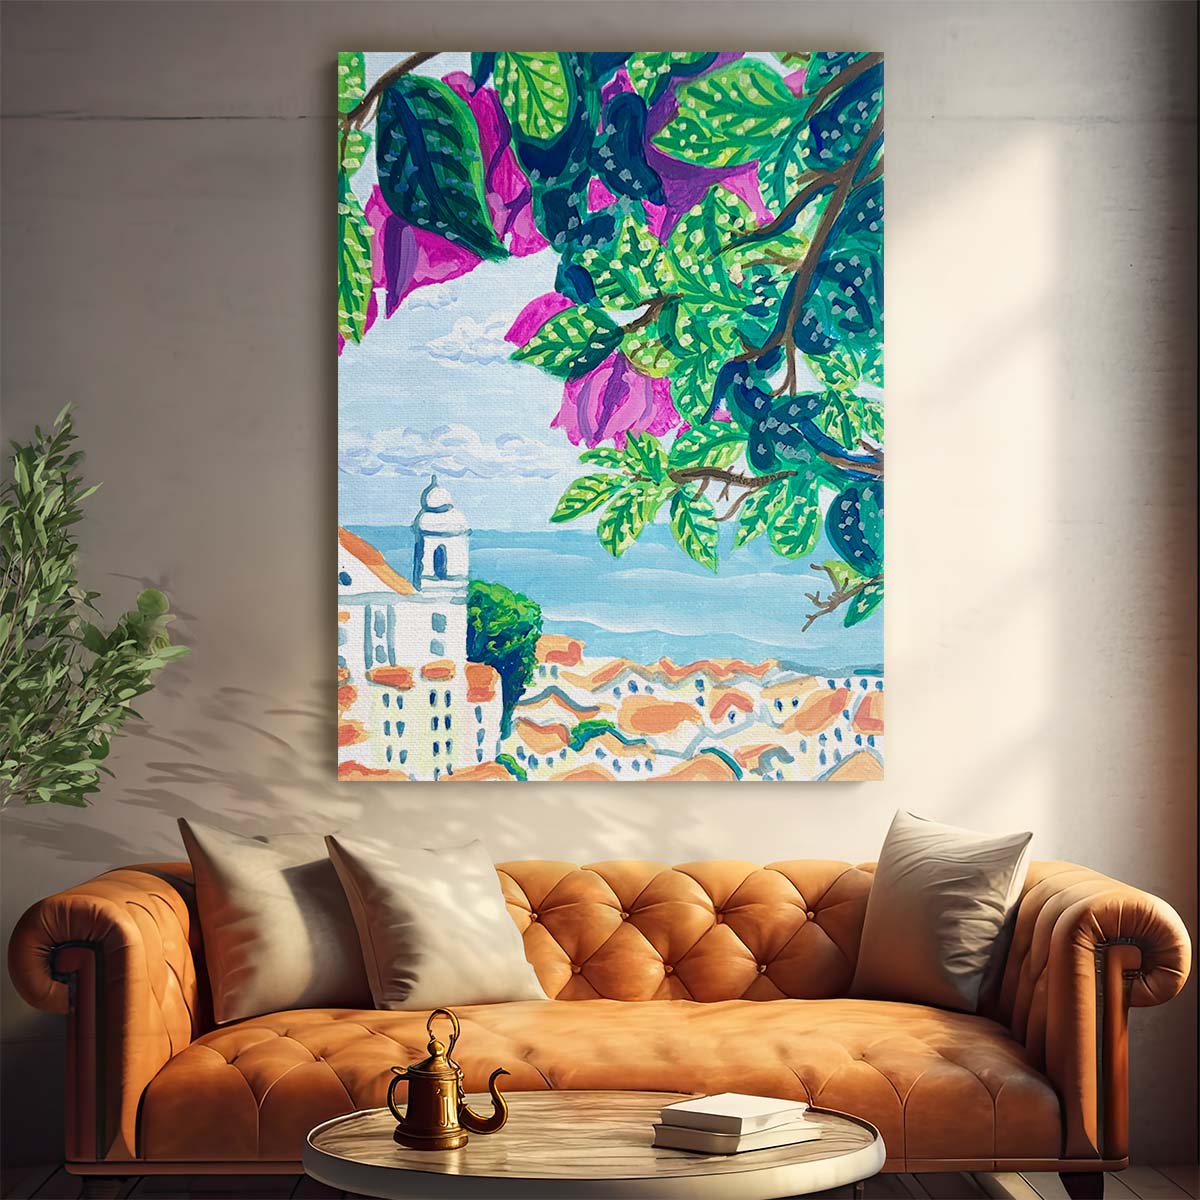 Vibrant Lisbon Cityscape Illustration Colorful Portugal Seascape Wall Art by Luxuriance Designs, made in USA